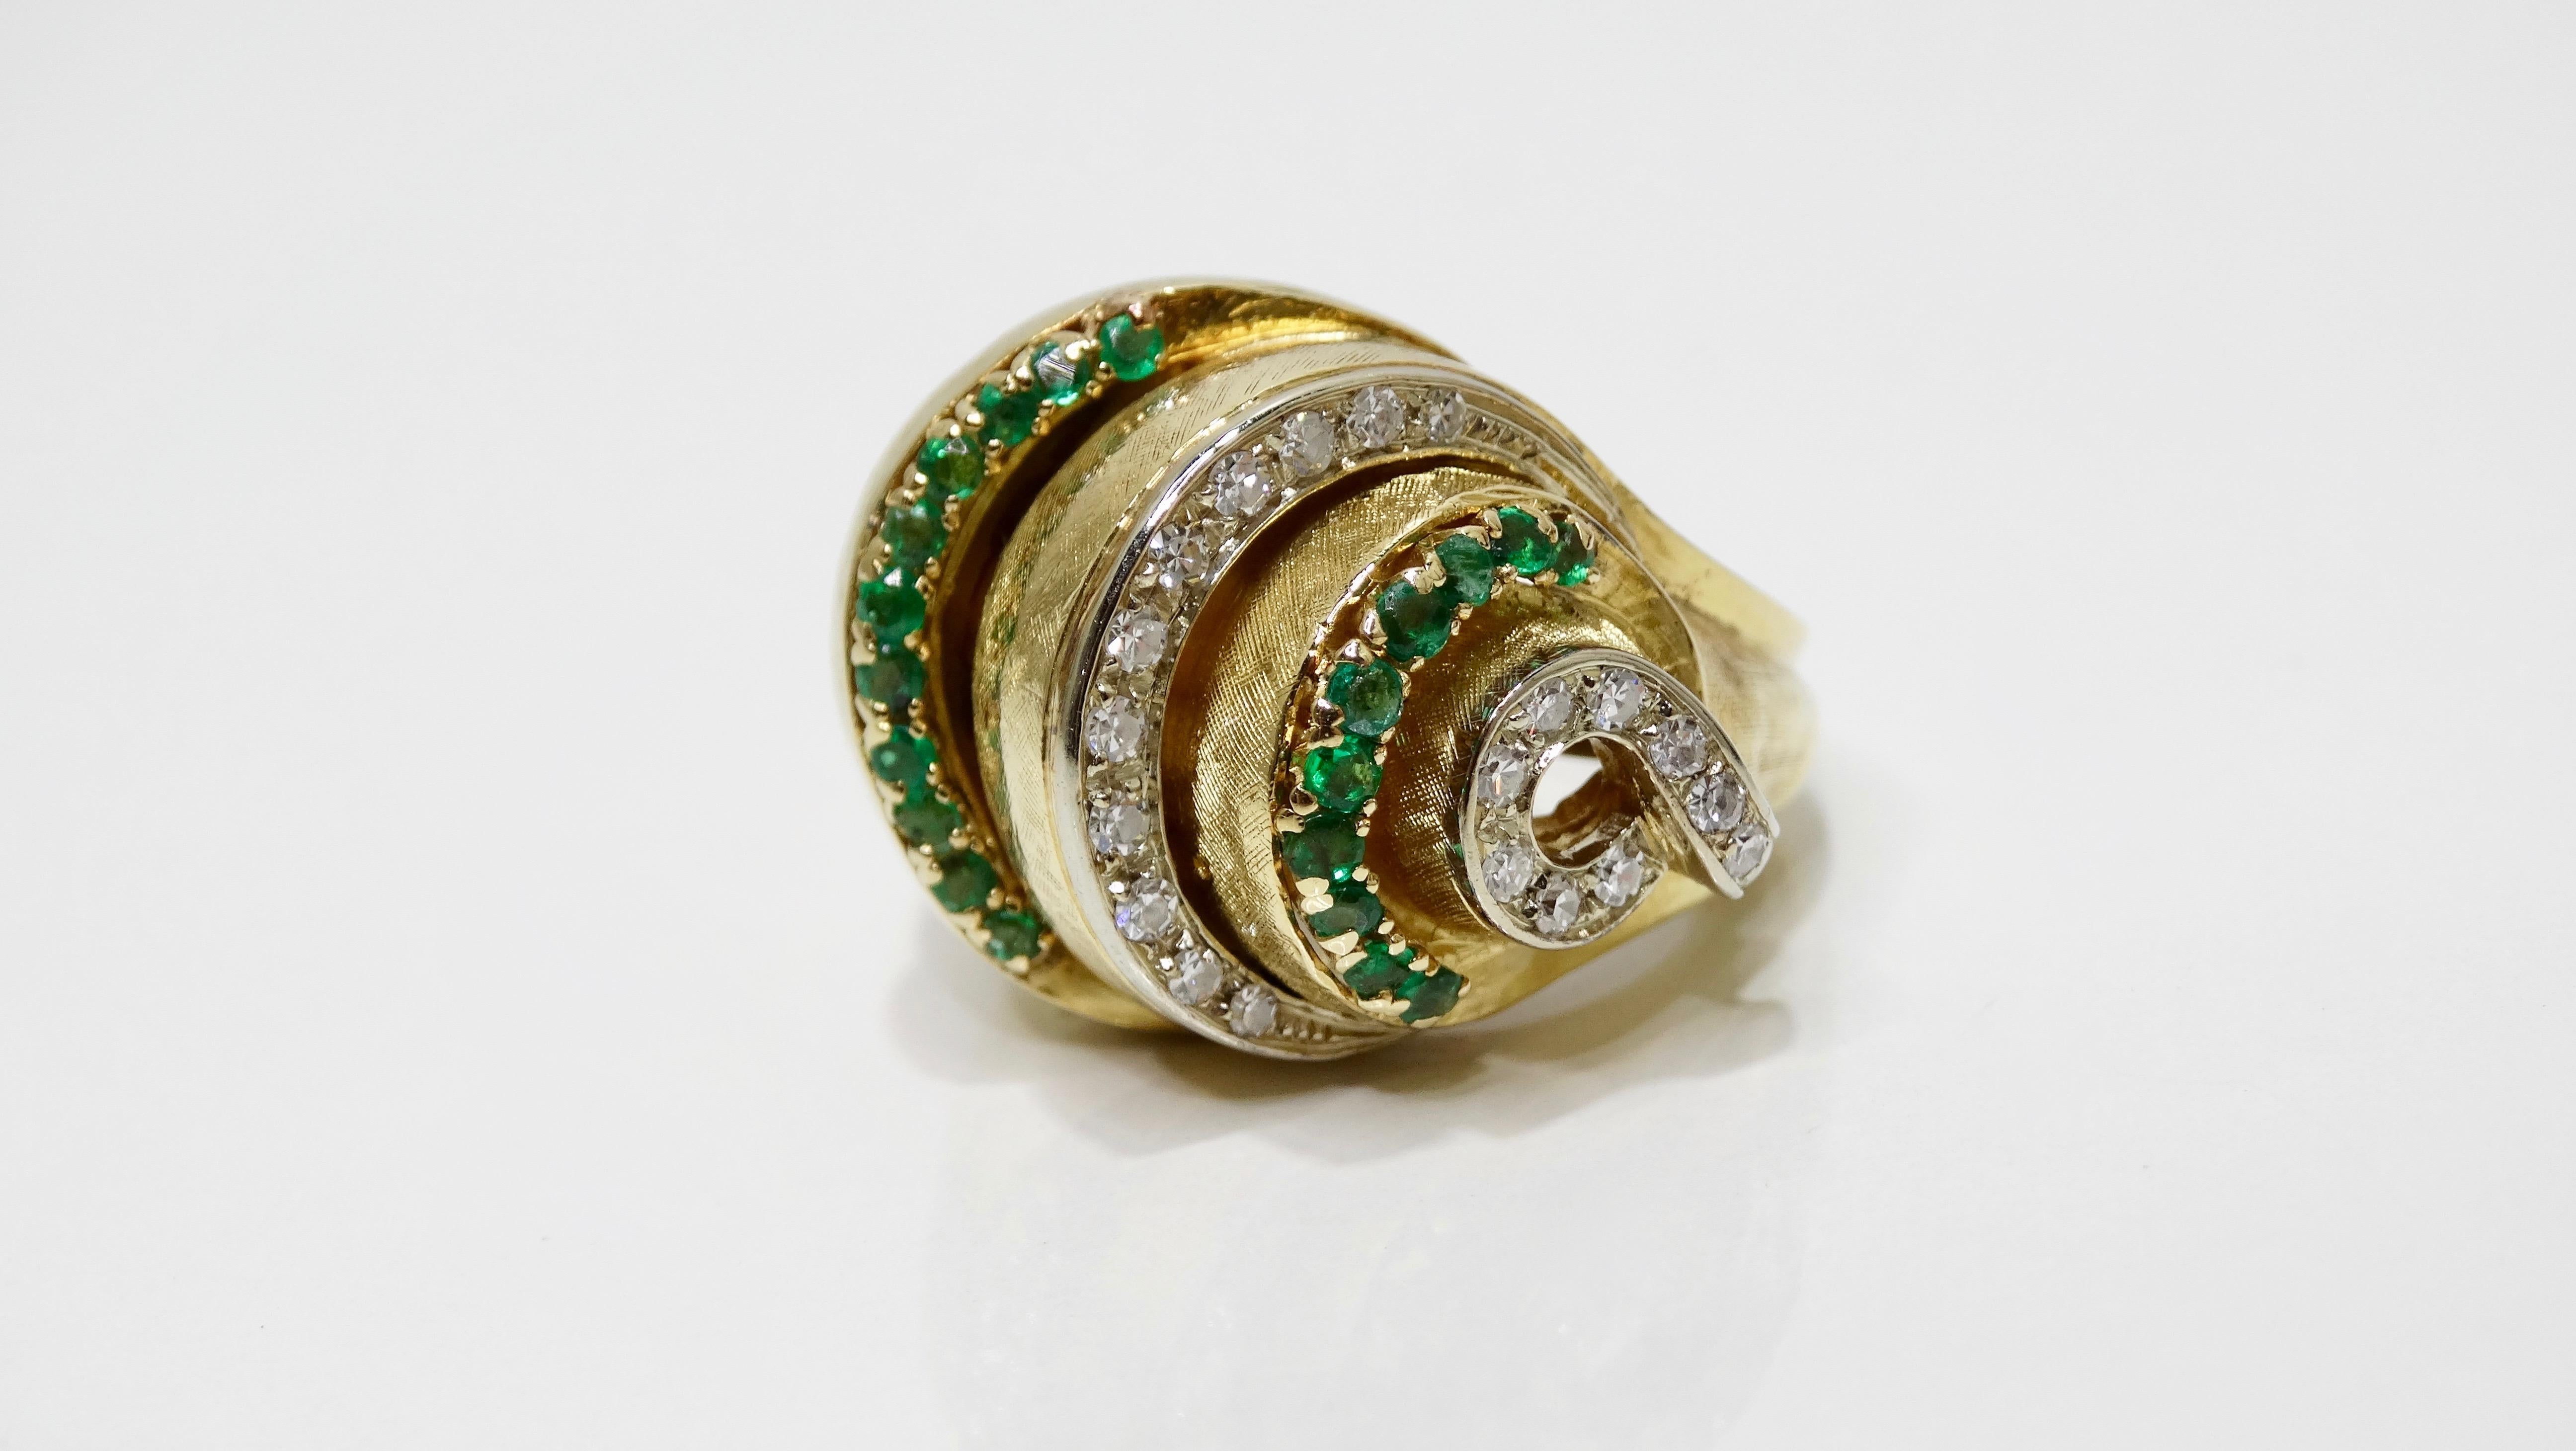 Bring on the cocktail ring that is! Circa mid-20th century, this gorgeous 18k Gold cocktail ring is crafted into an armadillo style band with tiered rows of brilliant round cut Diamonds and Emeralds in a prong setting. Rings total weight in grams is